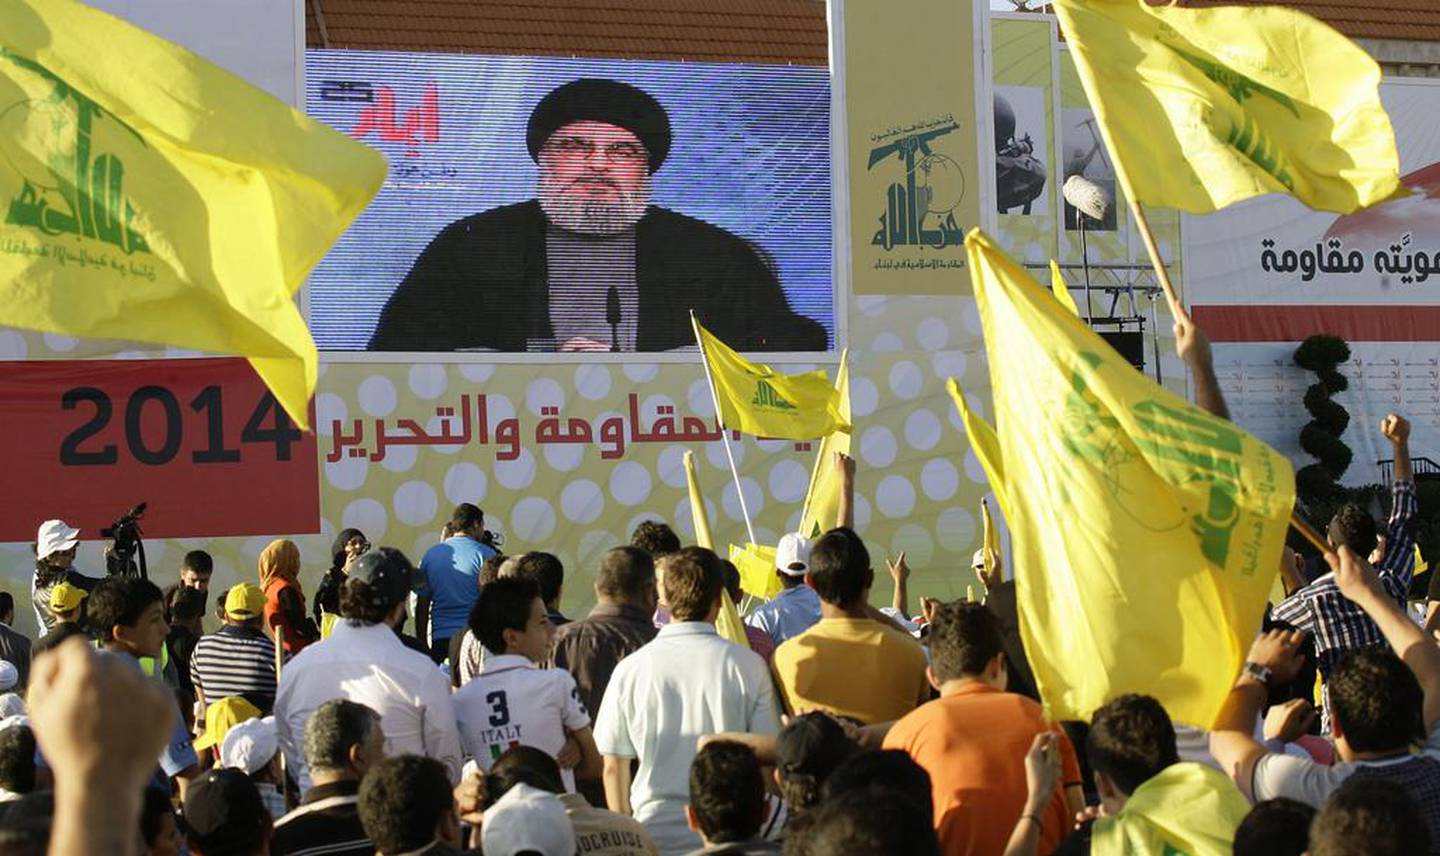 People listen to Hezbollah head Hassan Nasrallah as he speaks via a giant screen during the celebration in the southern town of Bint Jbeil, Lebanon. EPA